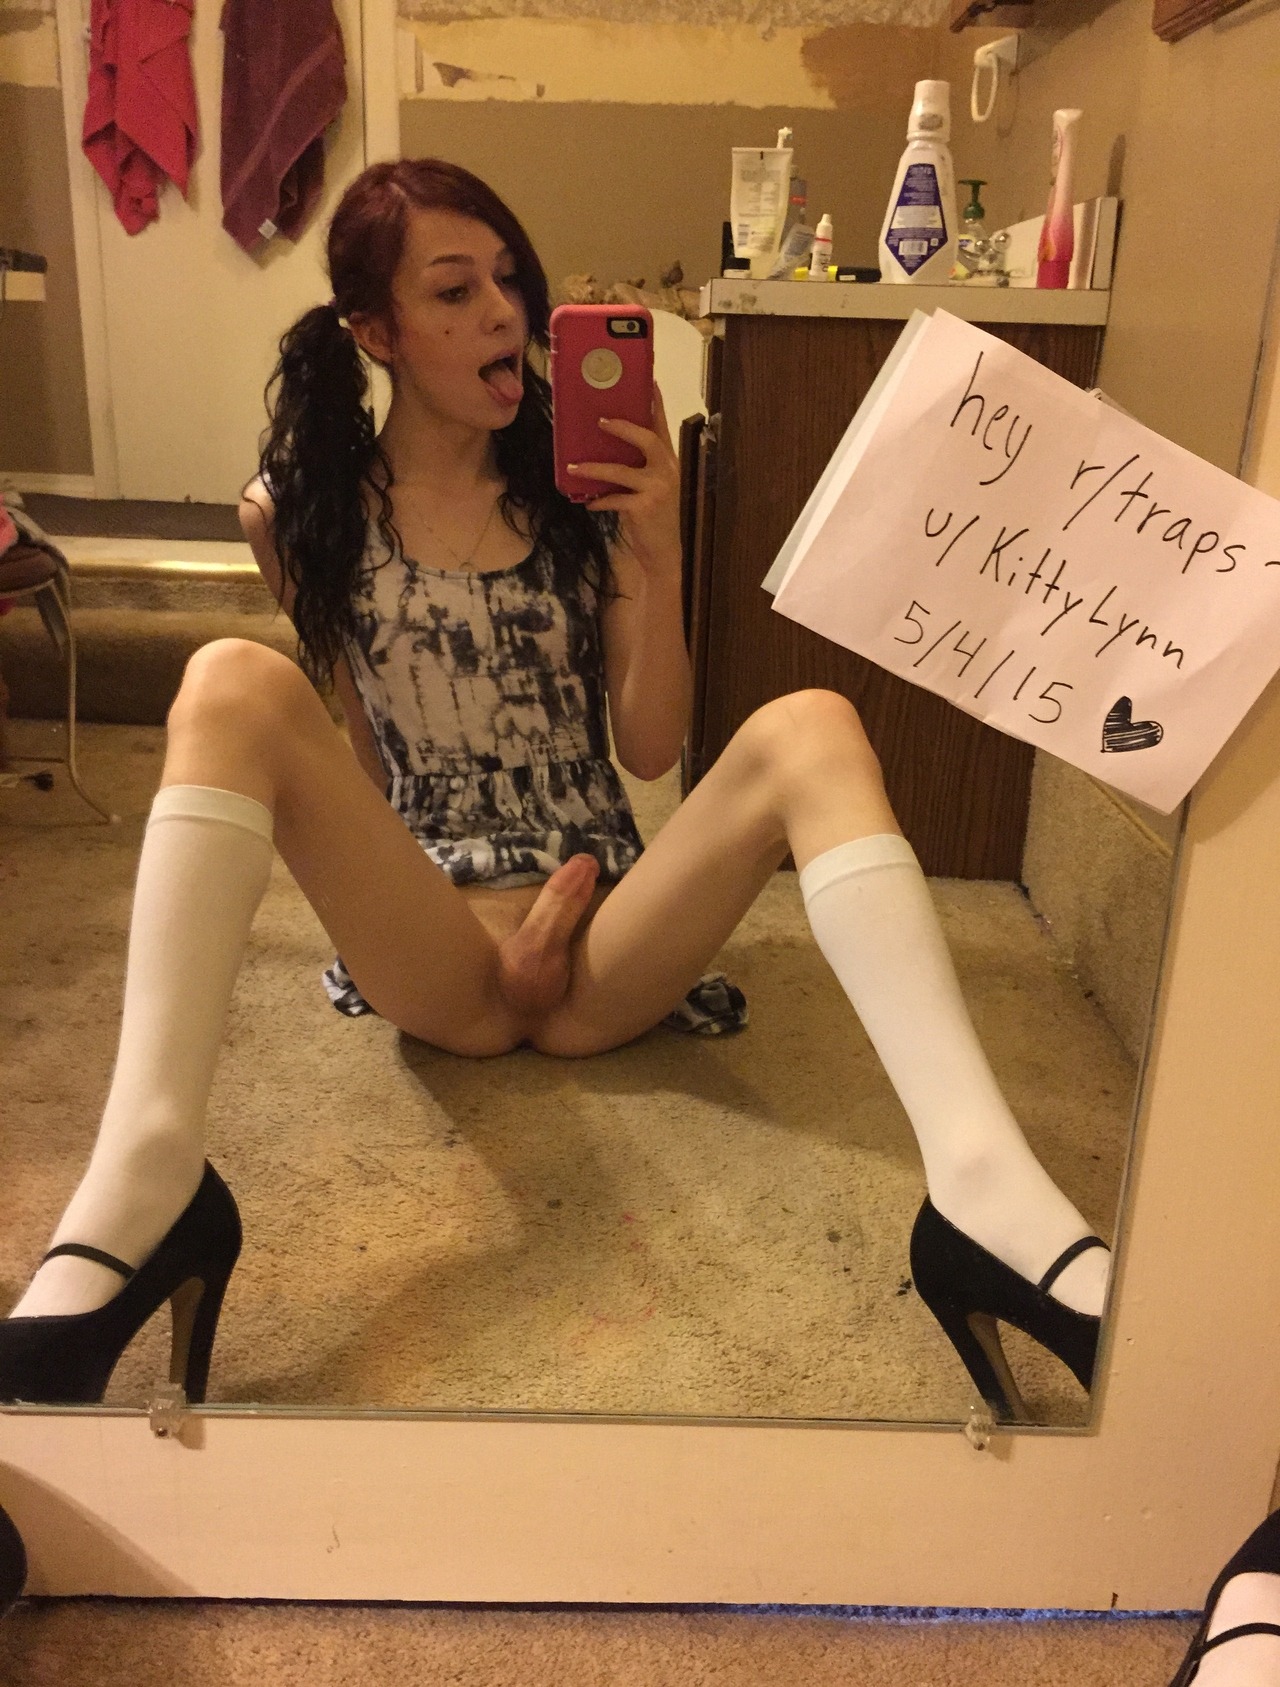 bbc all up in that tight white pussy she is riding #blonde #chickswithdicks #cutiepii33quinn #cutiepii33quinn #heels #nicelegs #tgirl #tongueout #transsexual